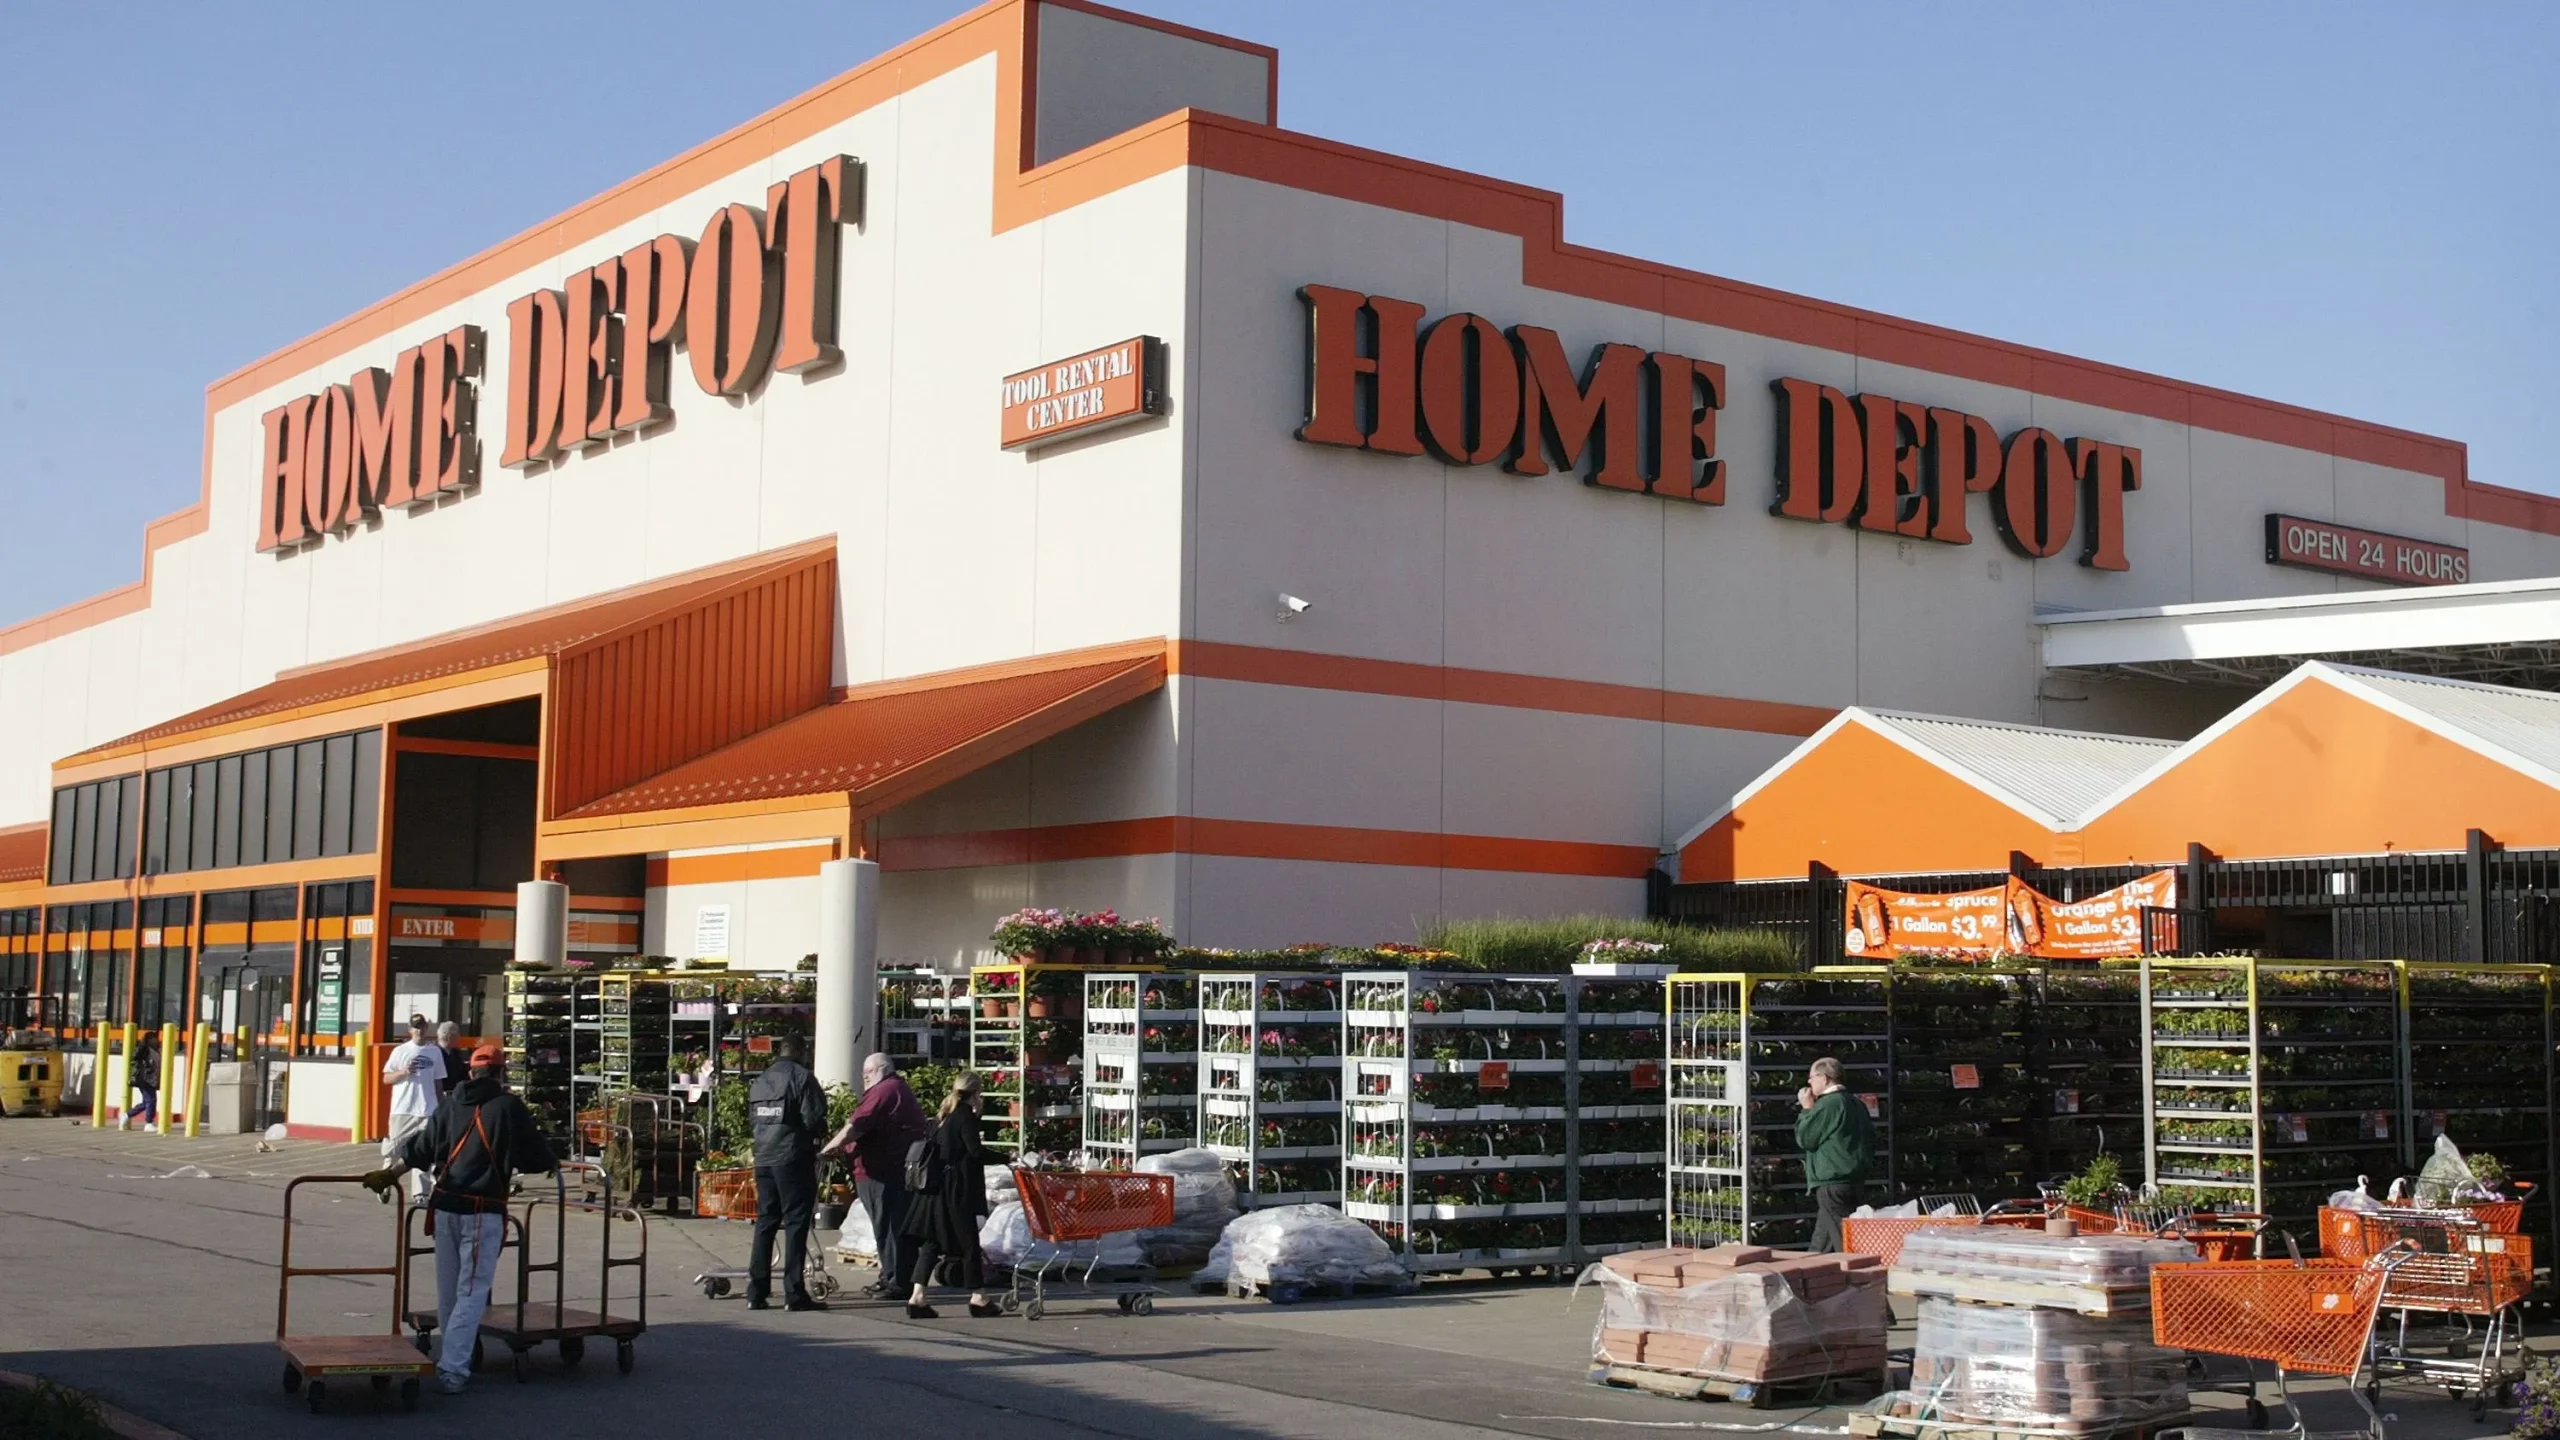 https://nndoh.org/wp-content/uploads/2023/11/home-depot-employee-discount-scaled.webp